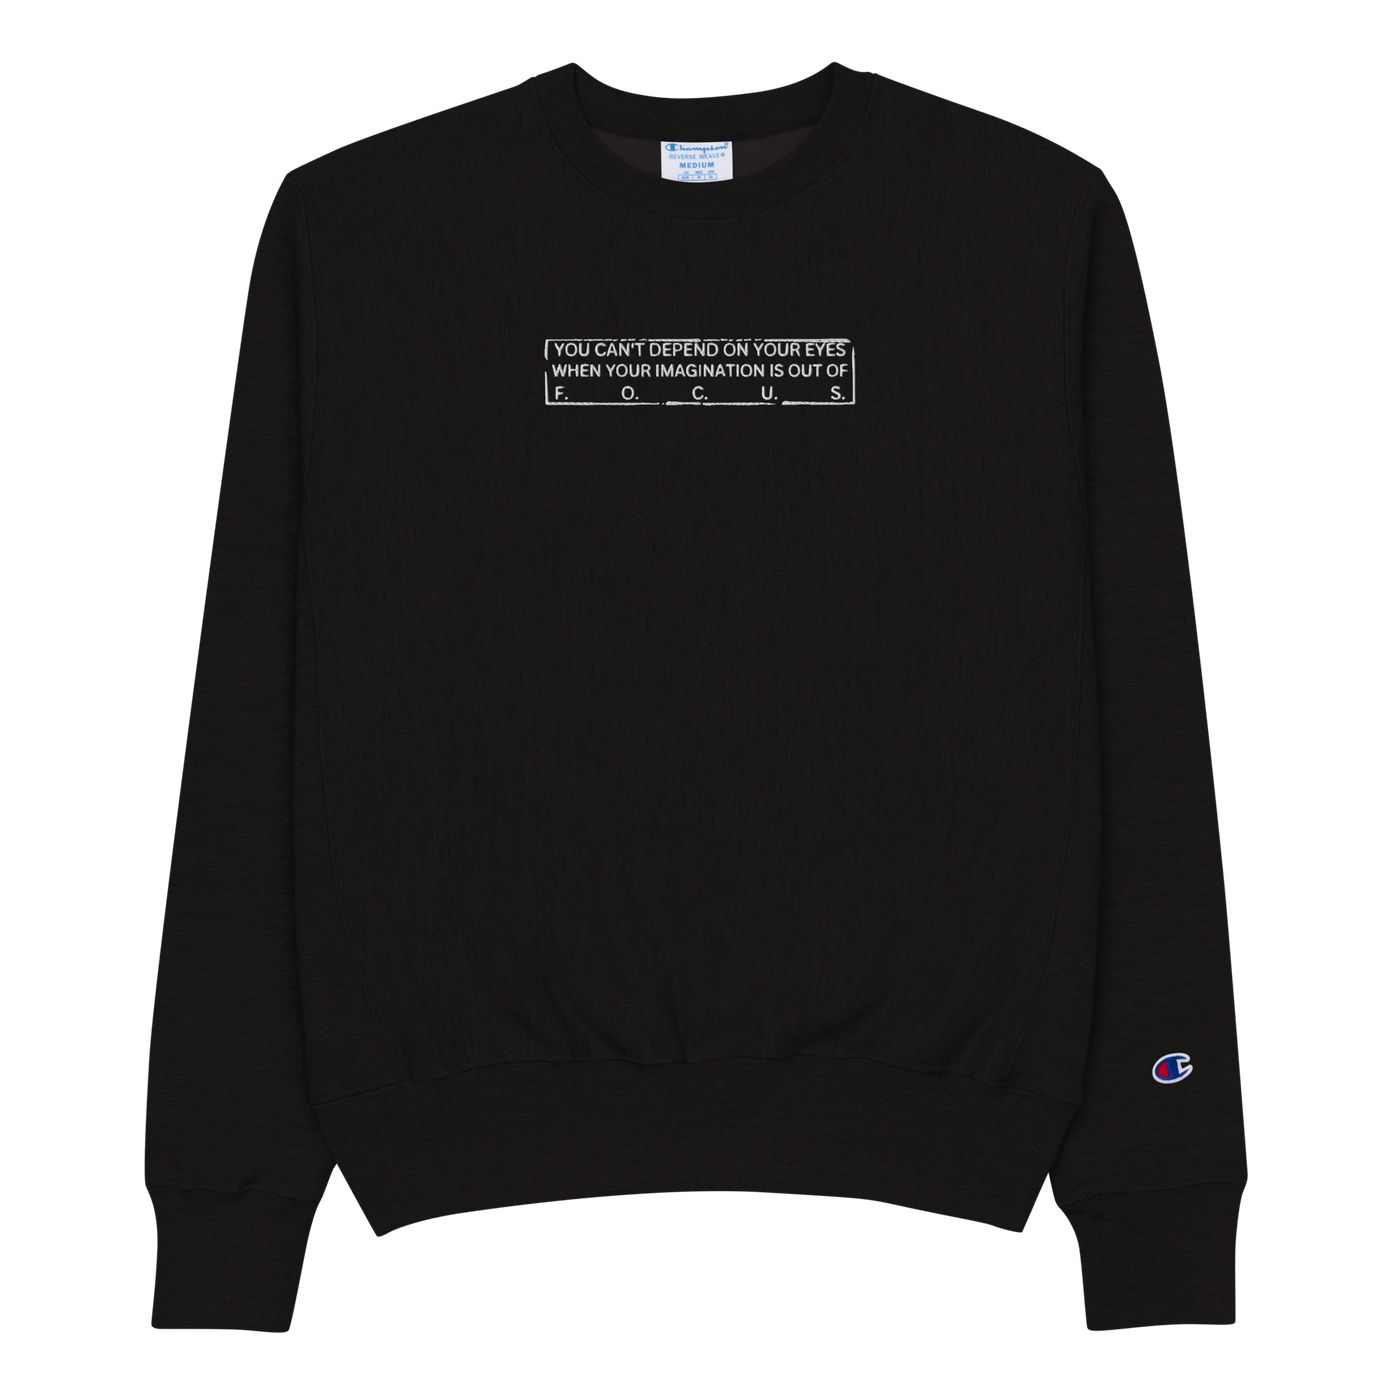 Men’s Champion Embroidered Black Sweatshirt - Out of Focus